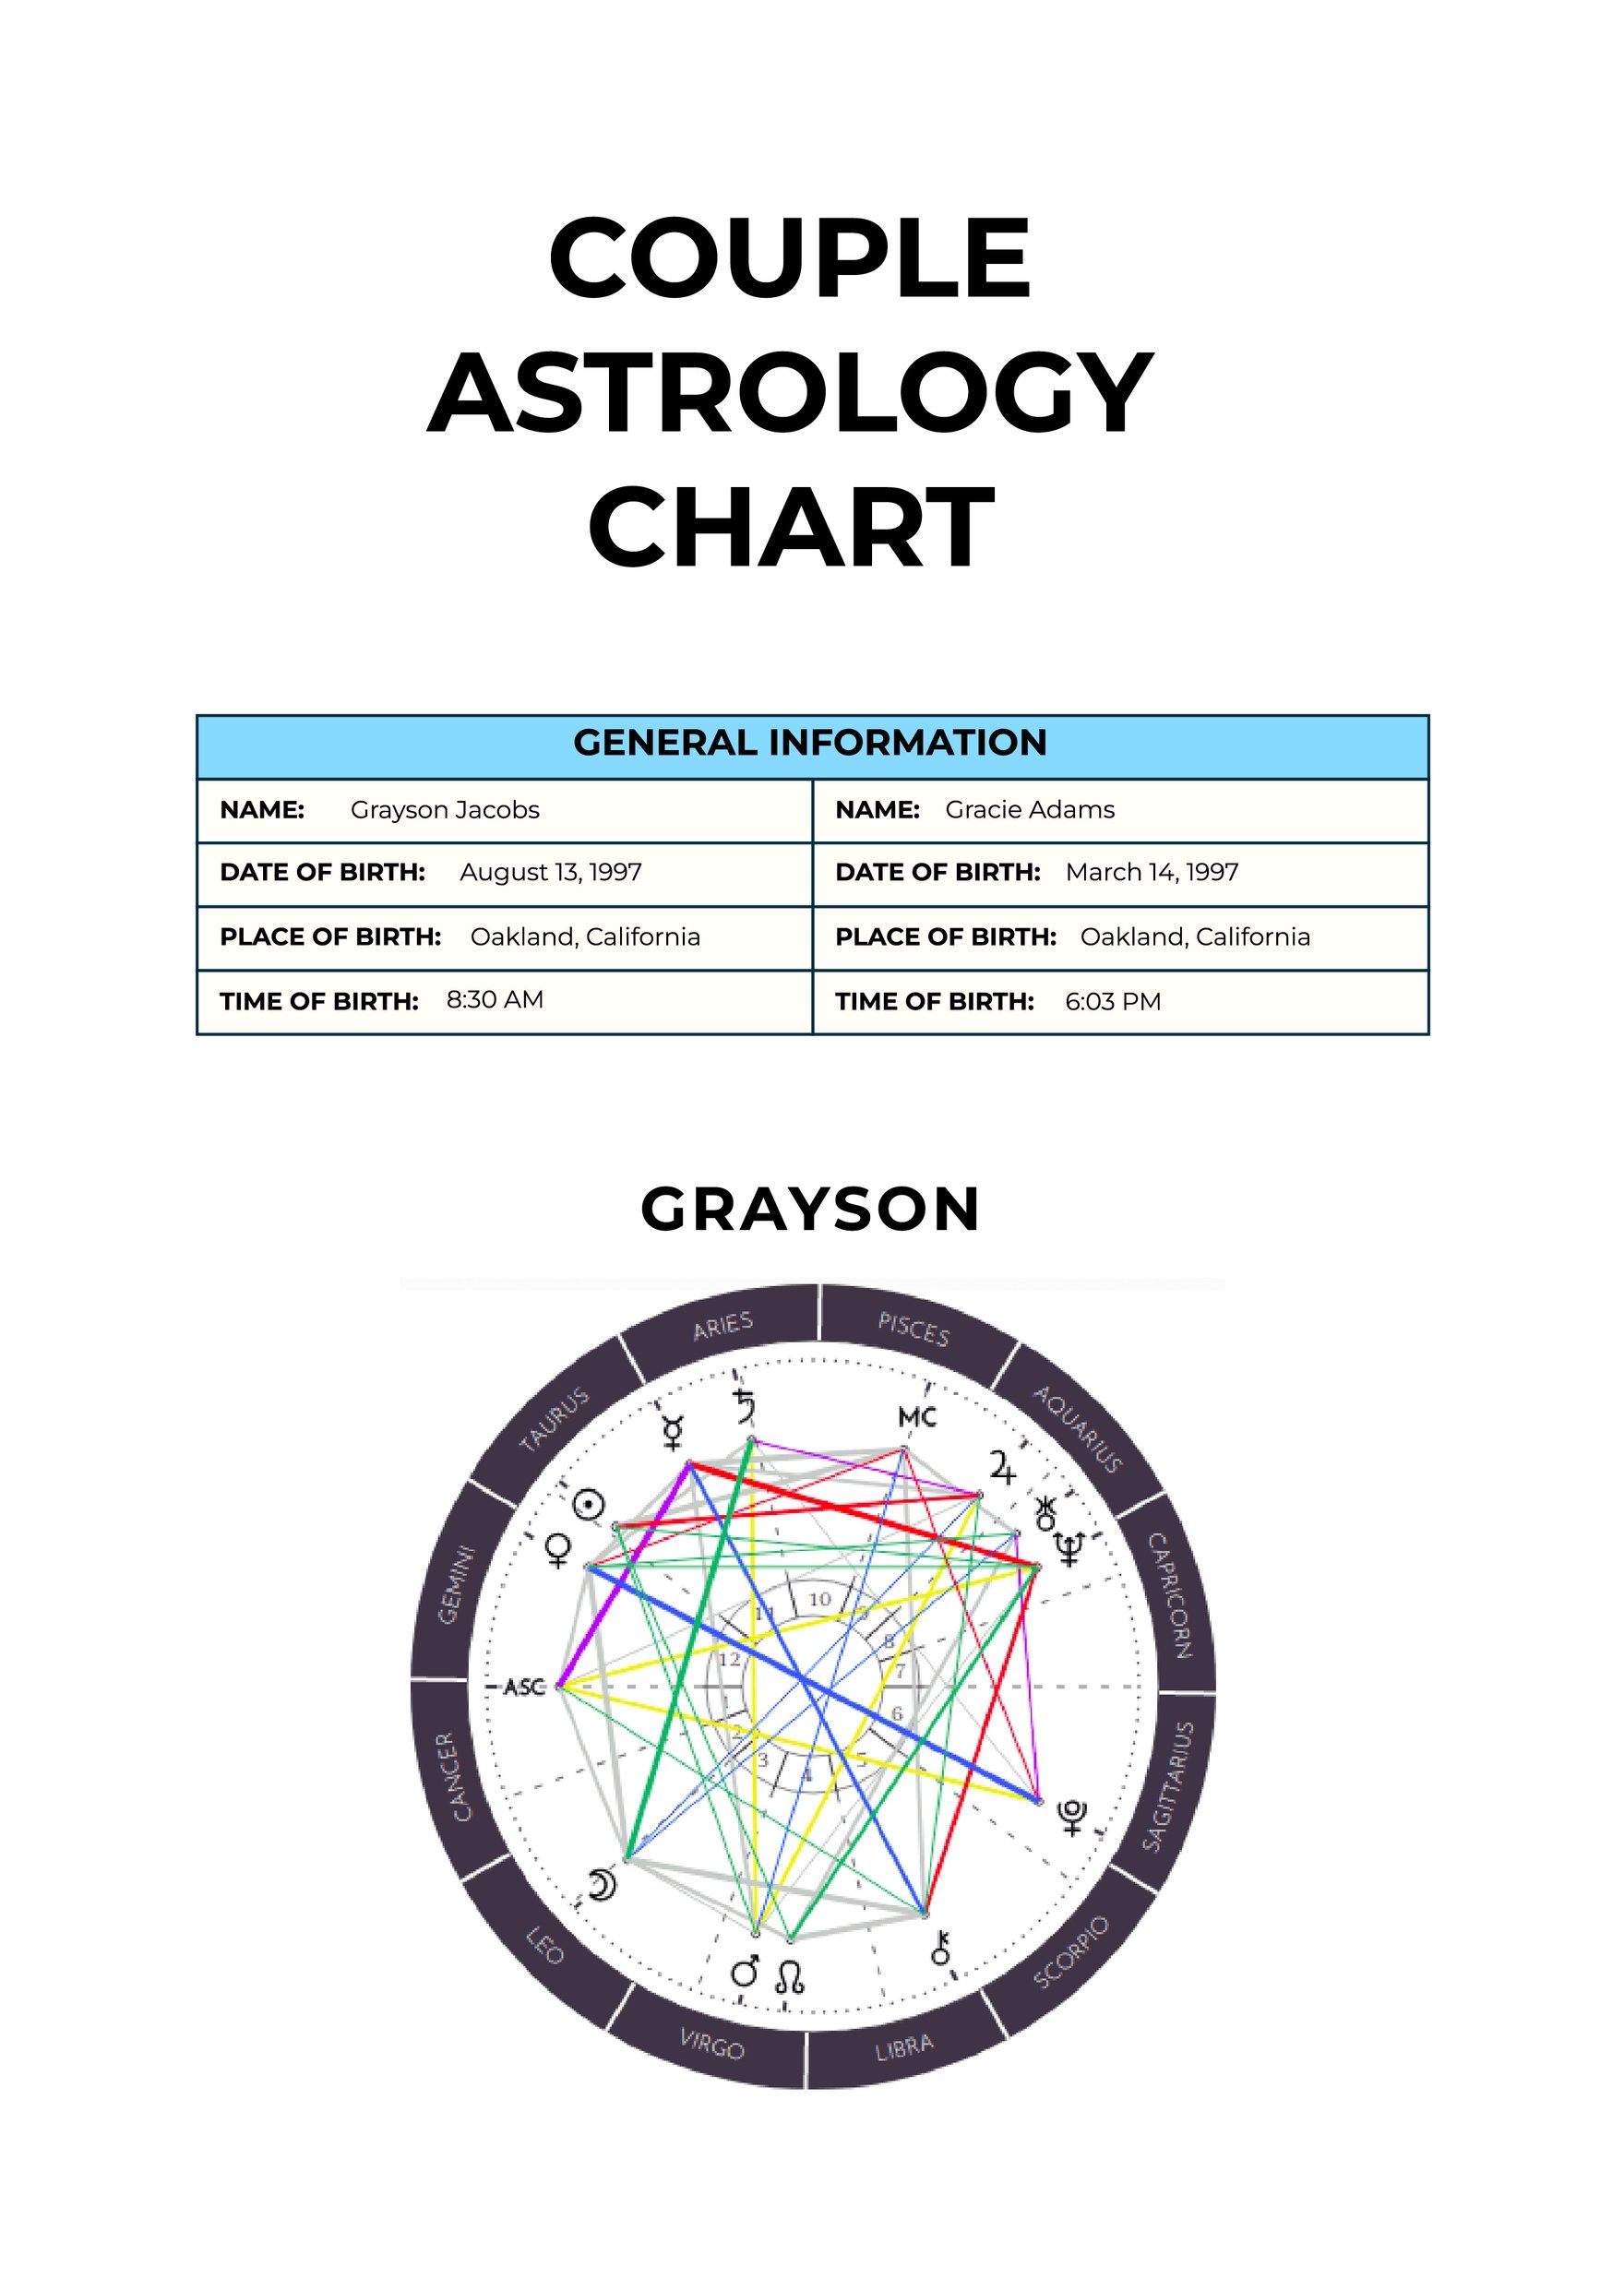 Free Couple Astrology Chart Template in PDF, Illustrator